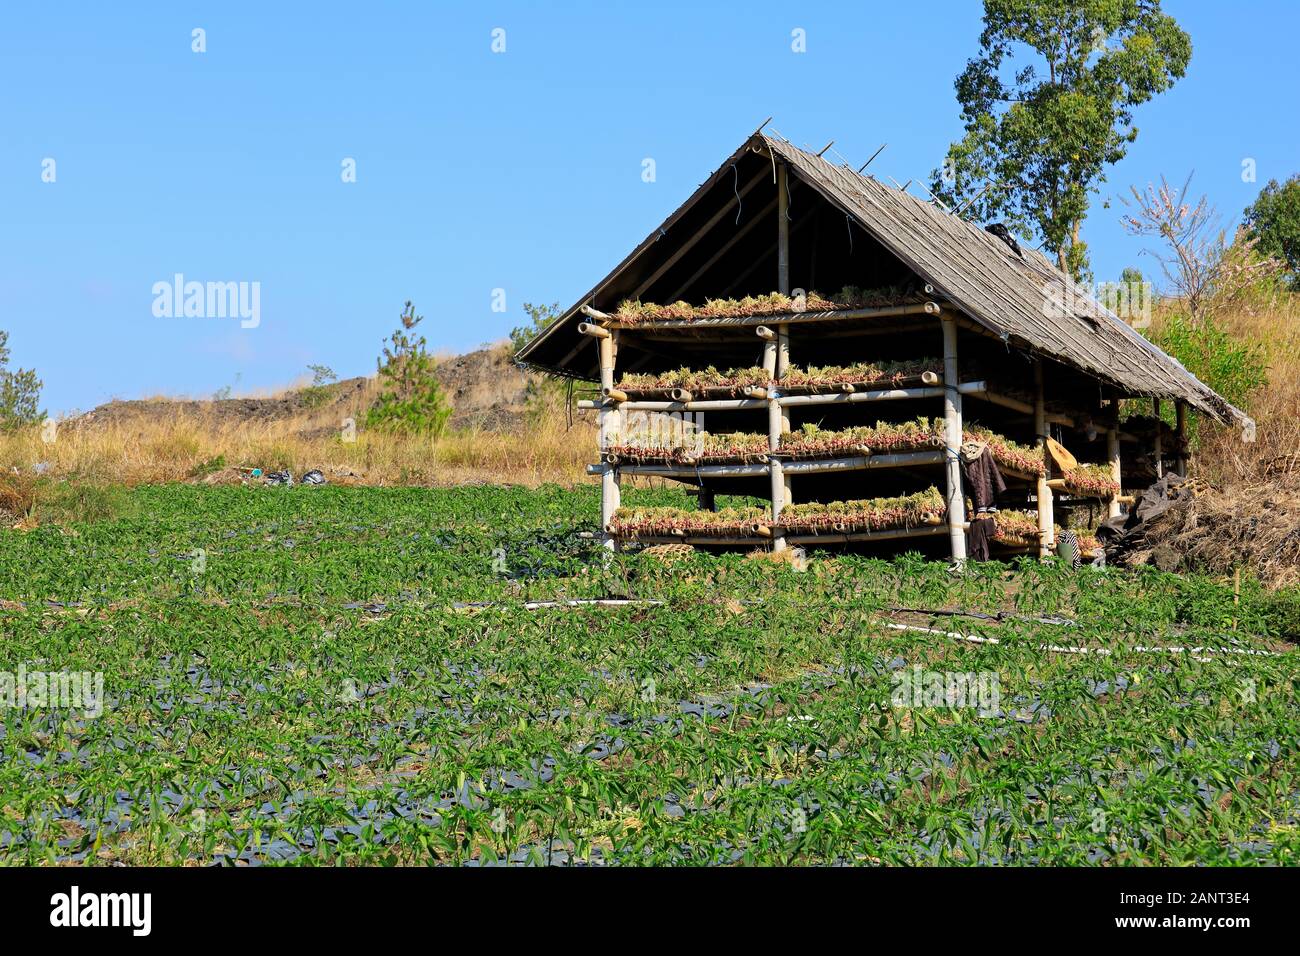 Field of irrigated aubergines and wooden structure with drying onions, Bali, Indonesia Stock Photo